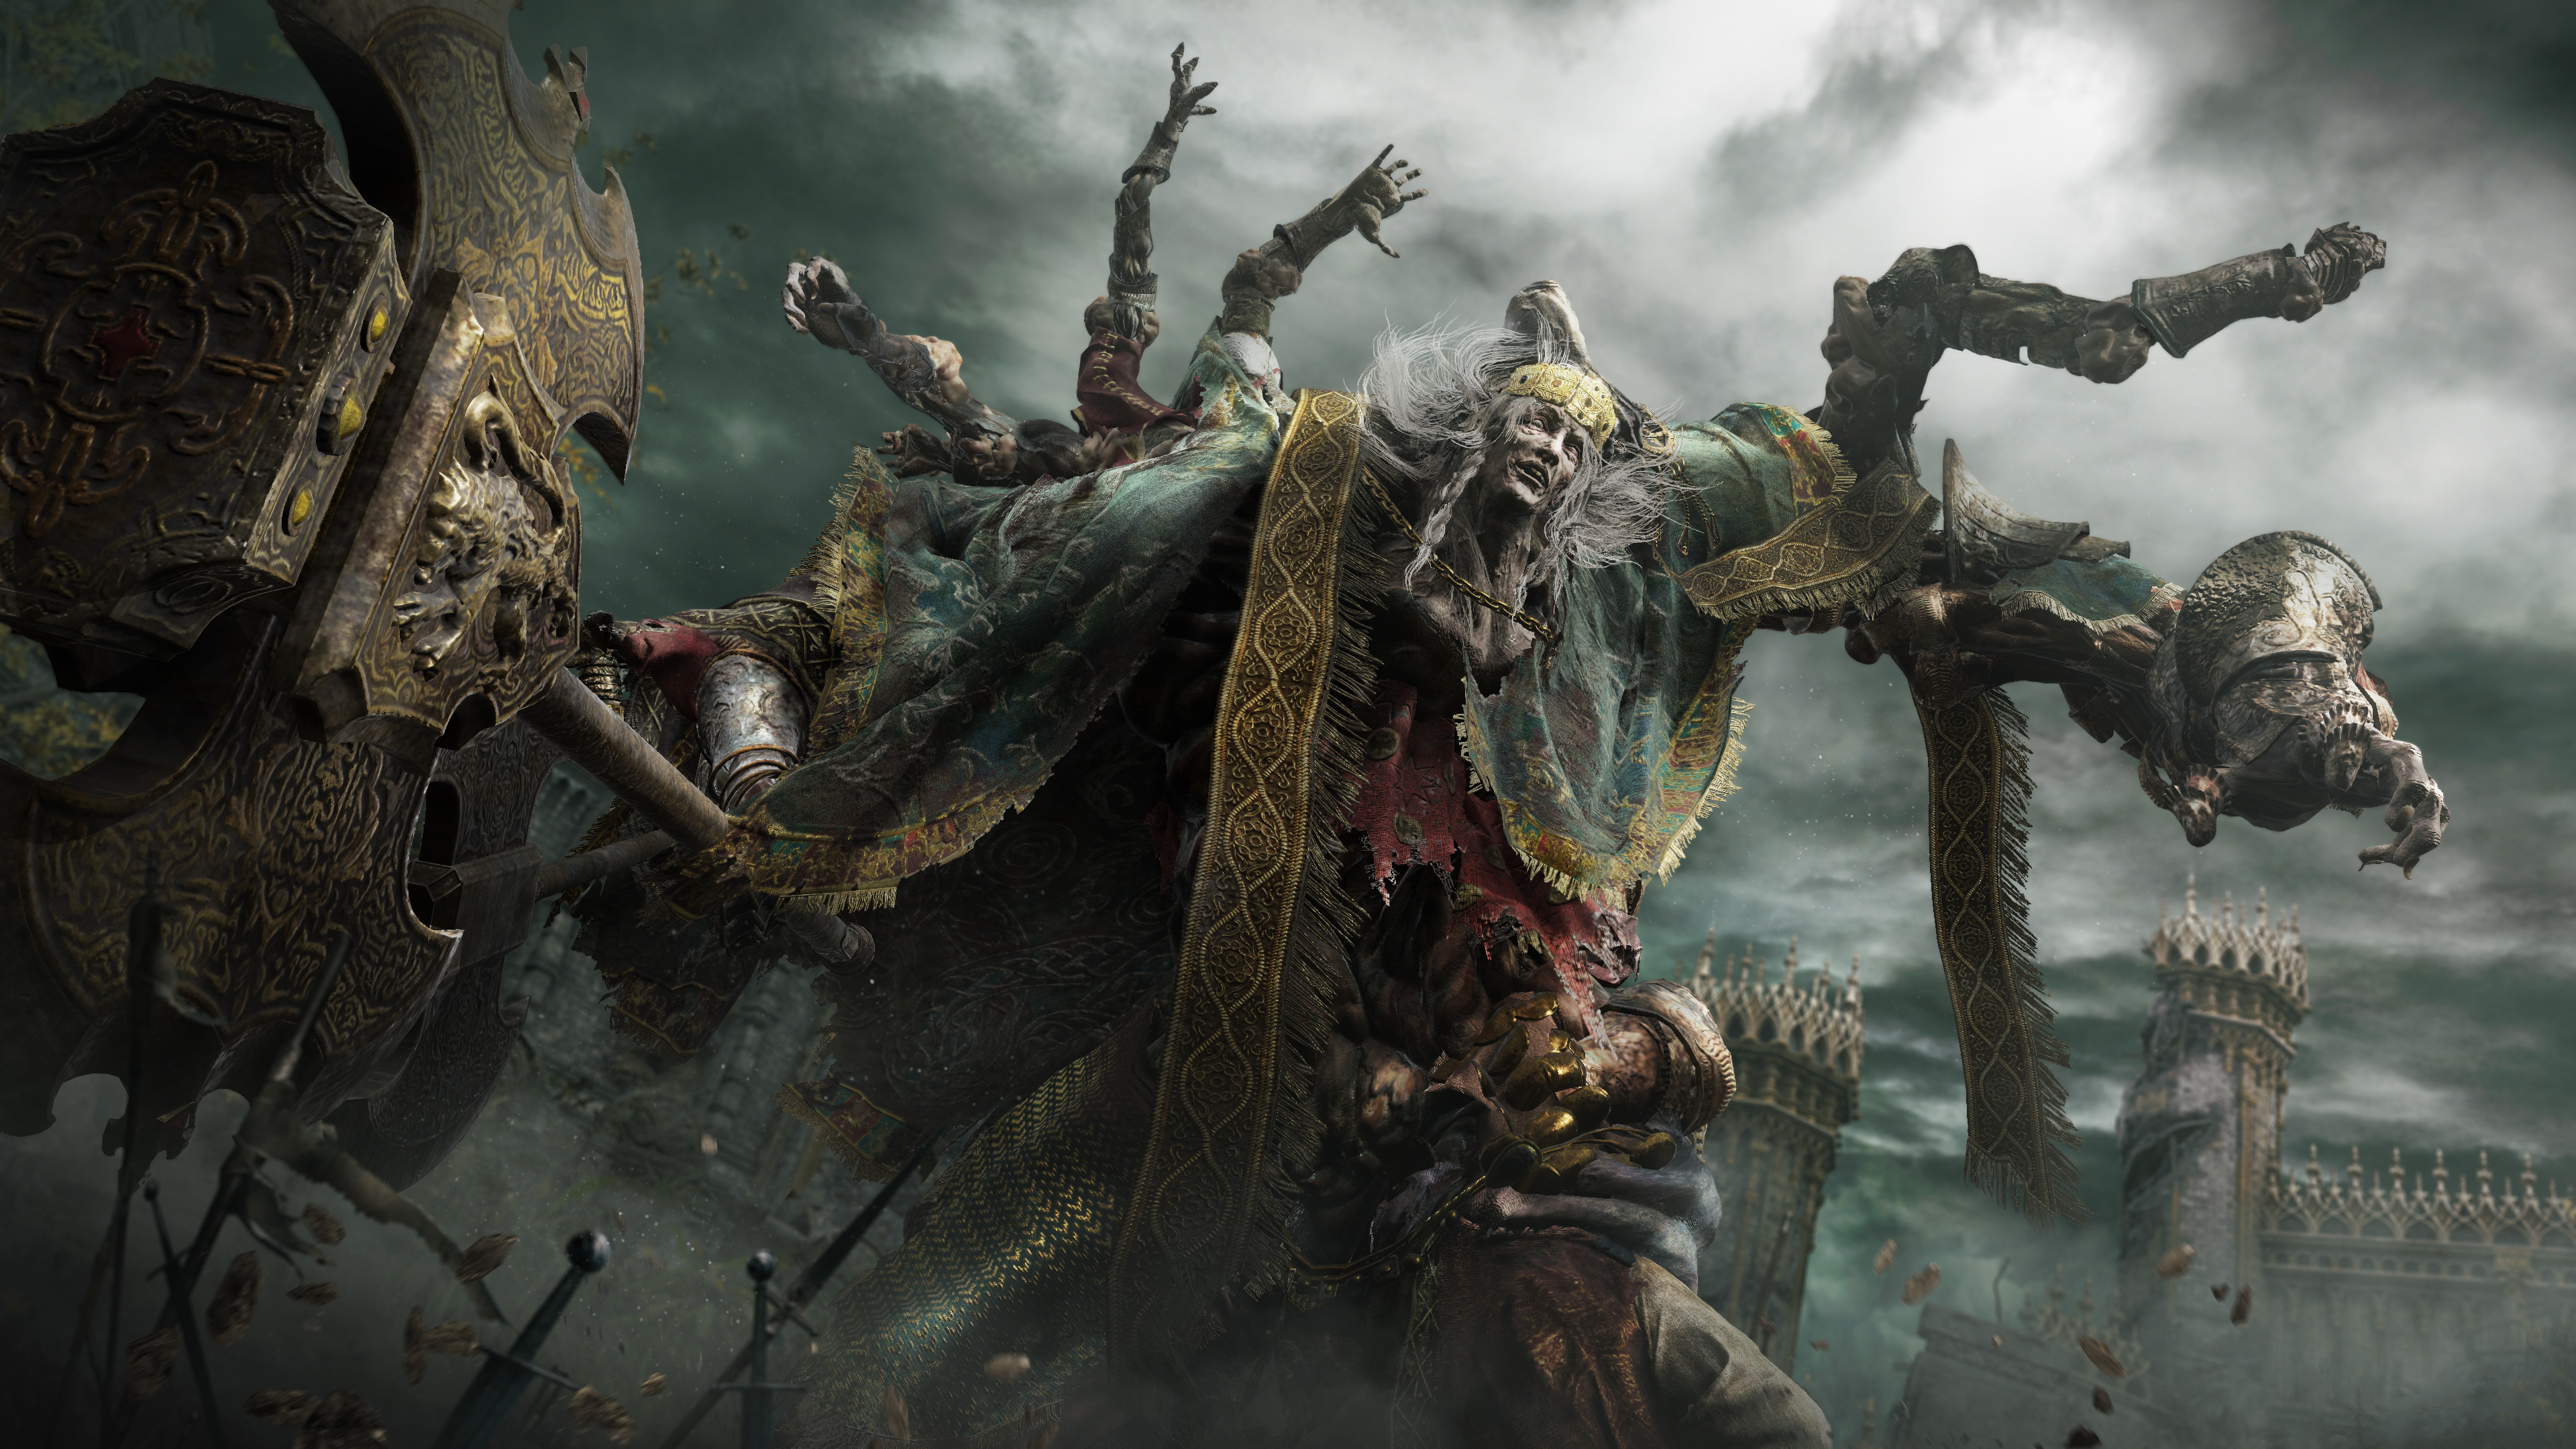 A still from the Elden Ring game showing a monstrous creature wielding a hammer